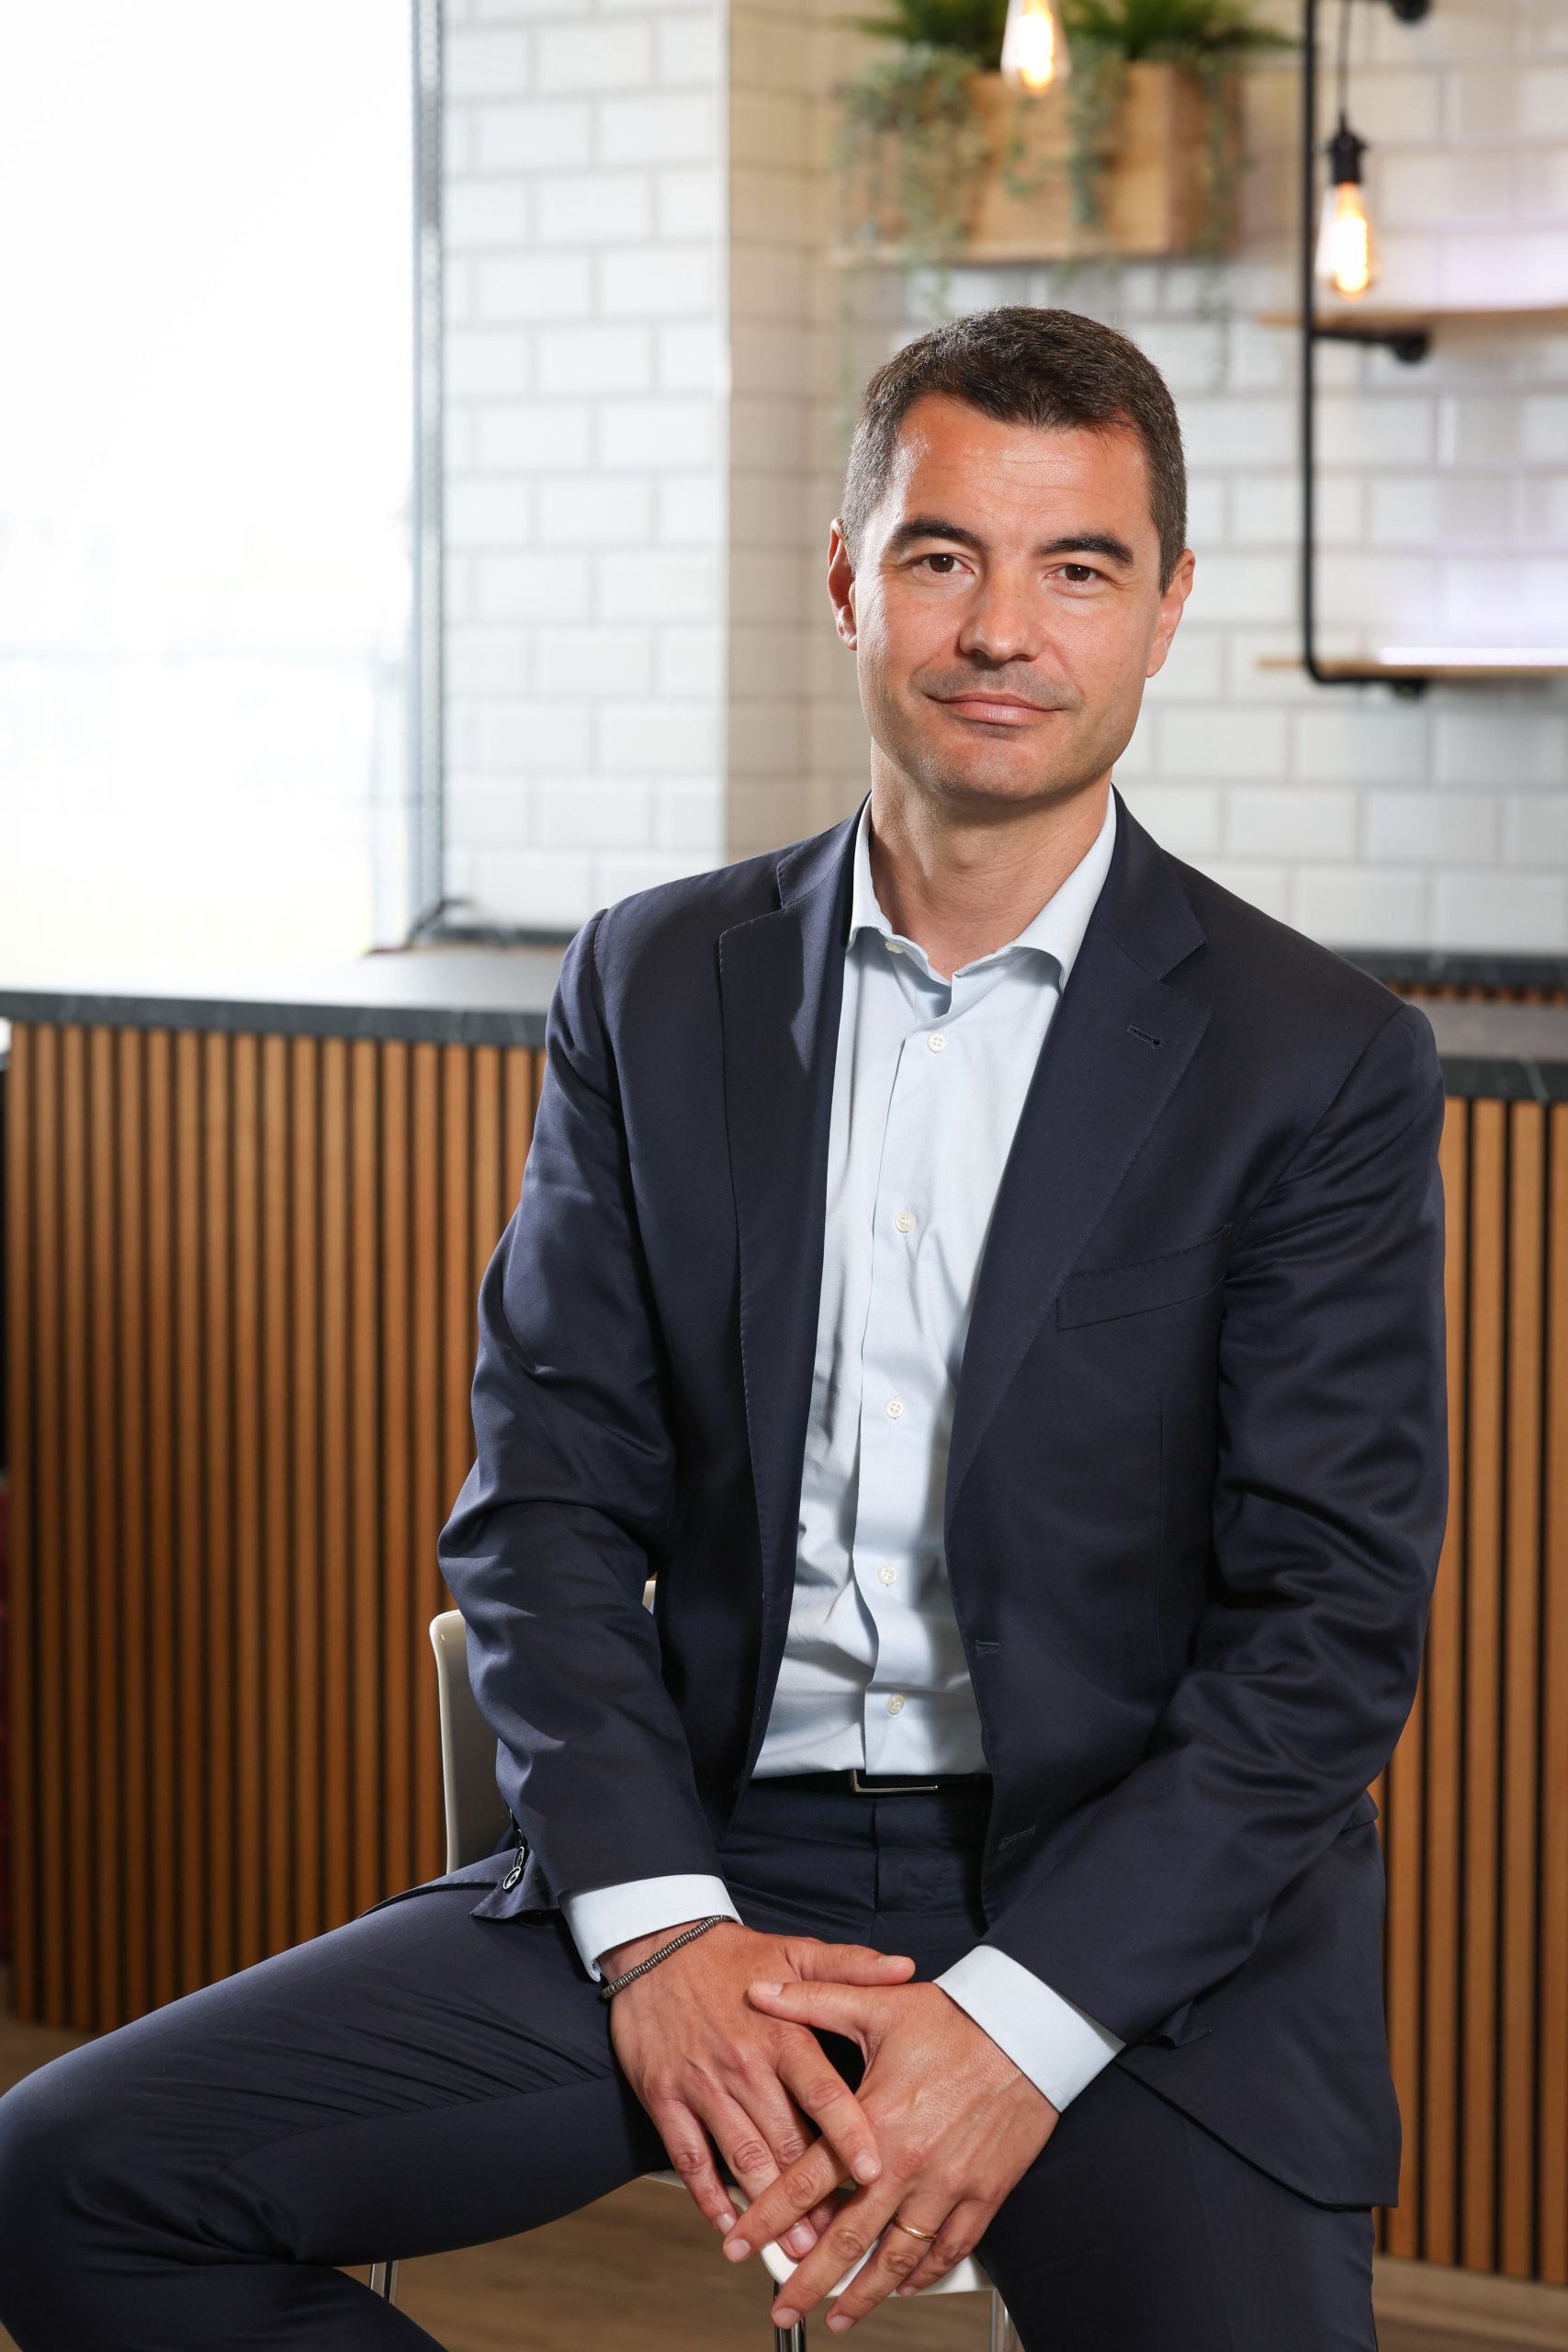 Davide Franzetti appointed General Manager of Coca-Cola HBC Ireland and NI